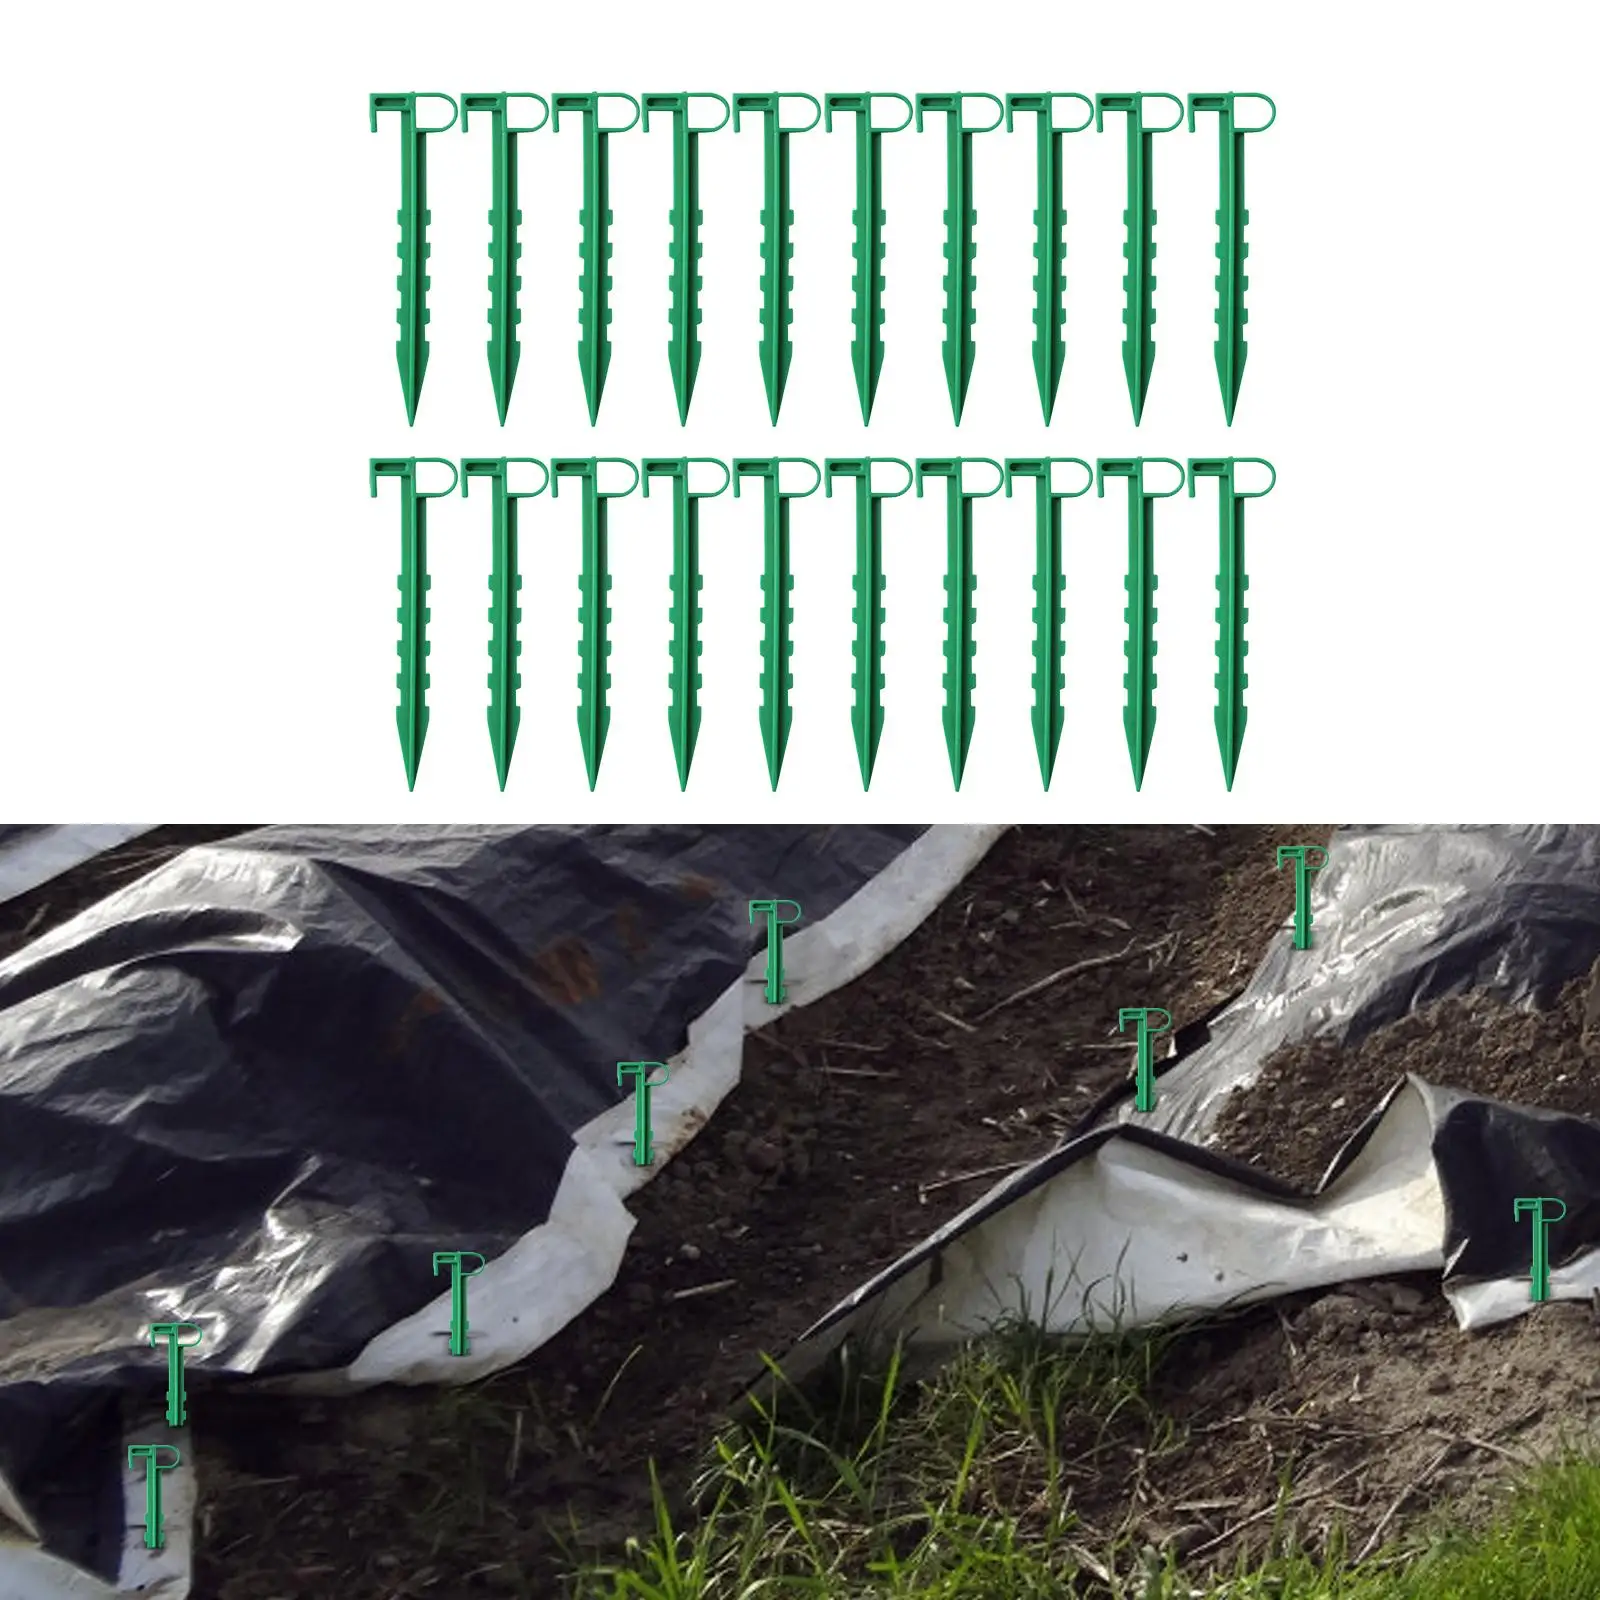 20x Garden Stakes Tarp Stakes Durable Fixed Fences Landscape Stakes for Holding Down Tents Camping Greenhouse Fabric Lawn Edging